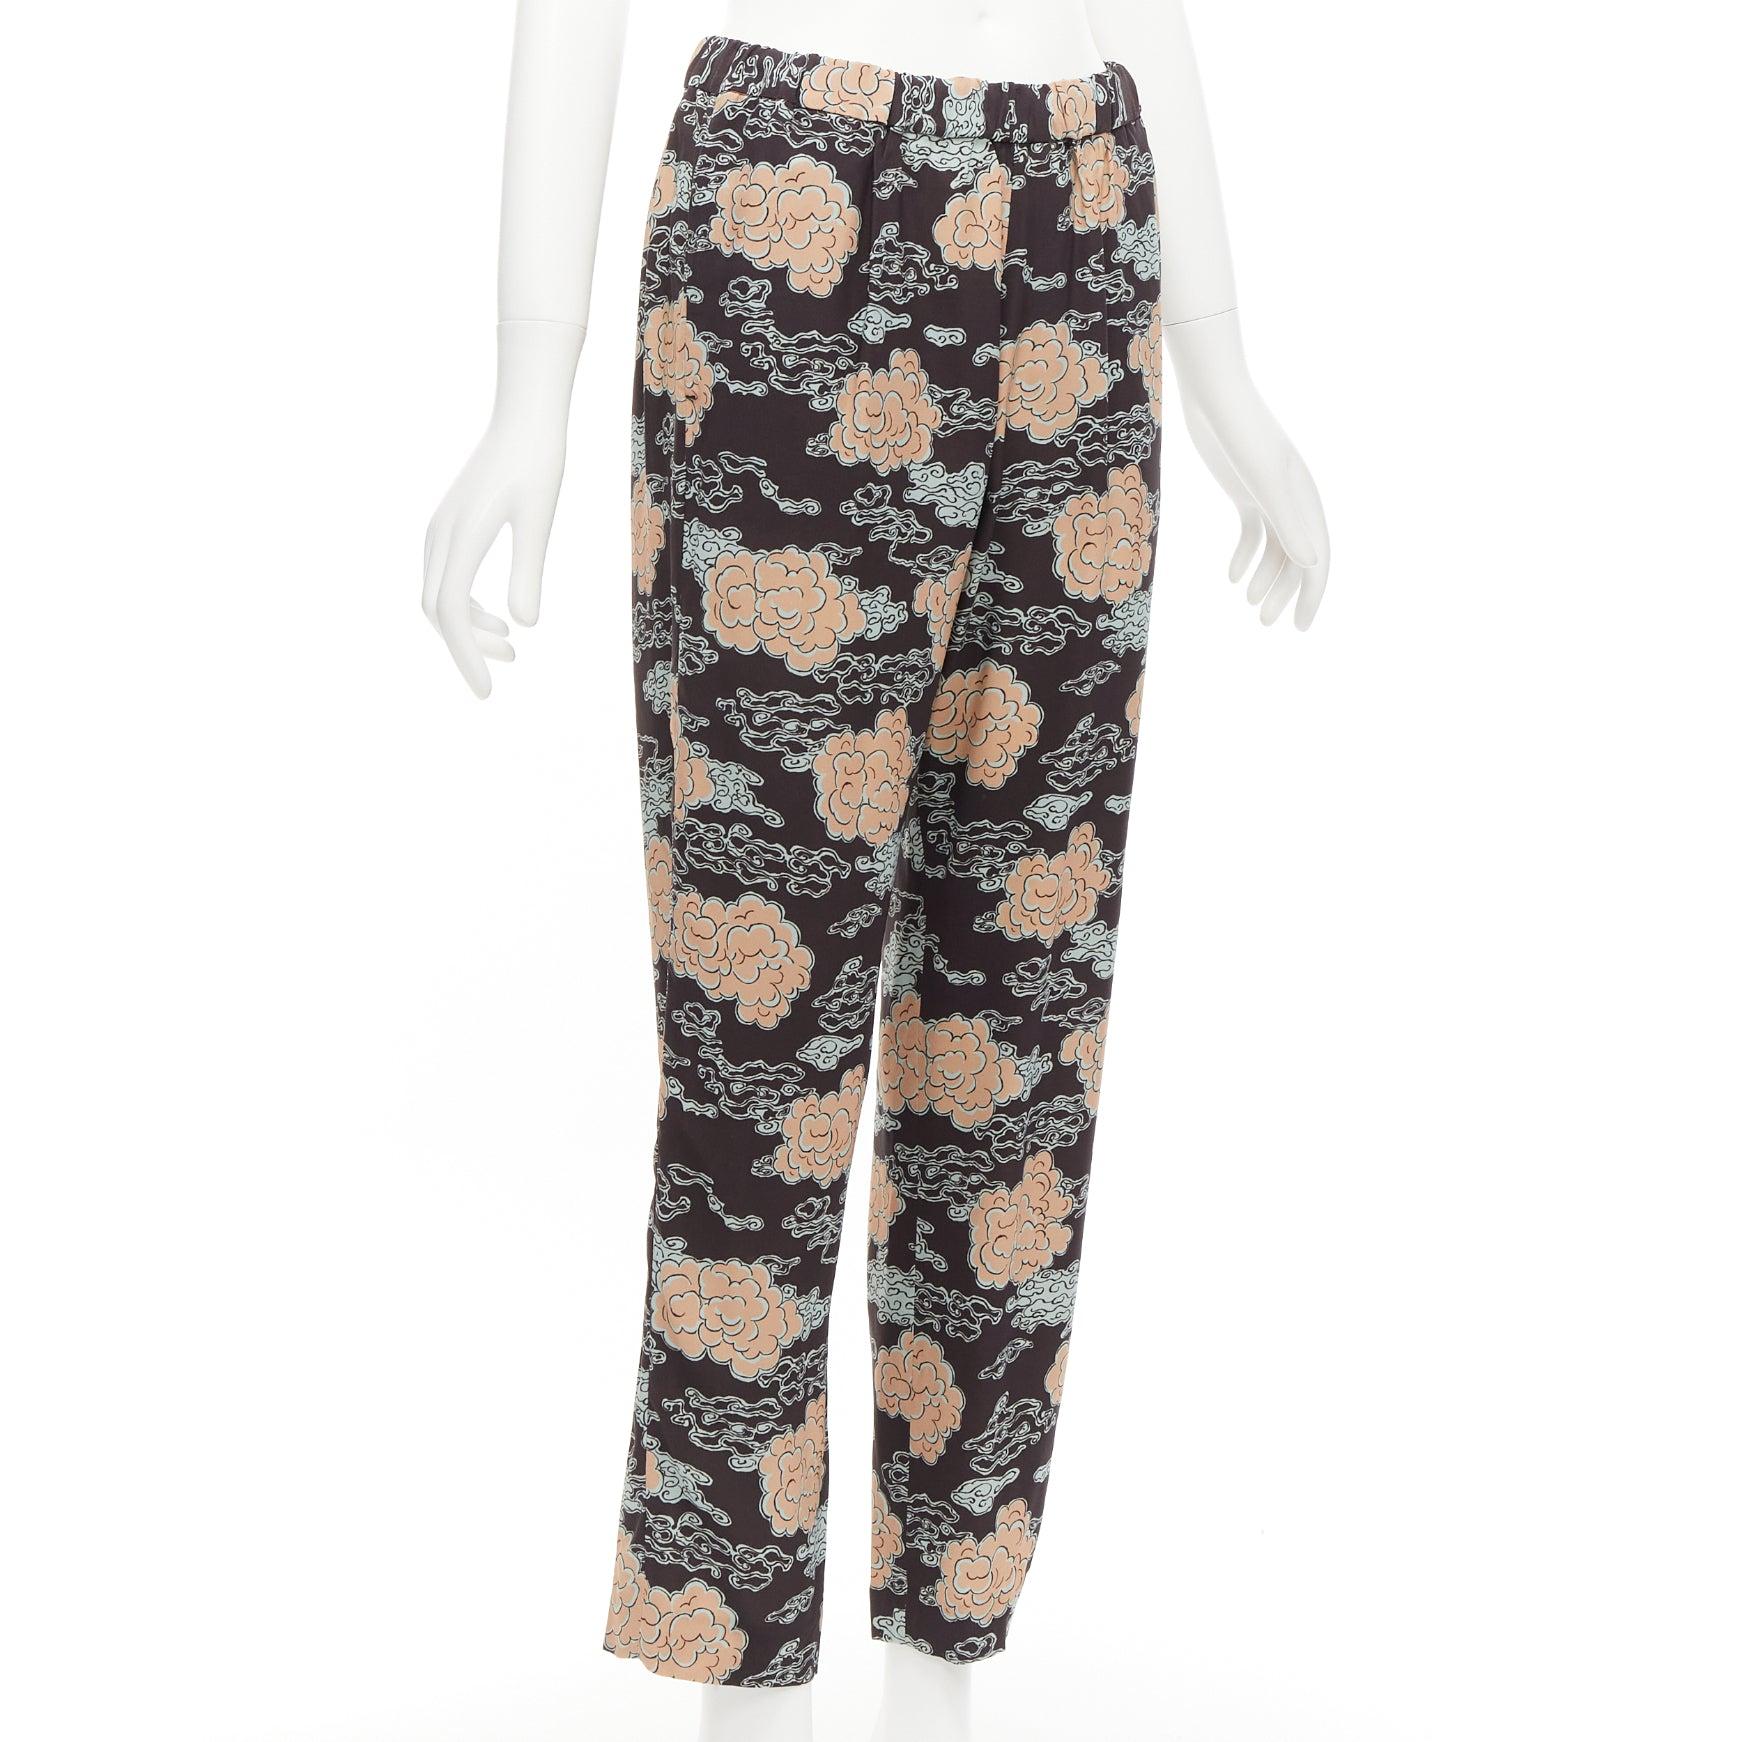 DRIES VAN NOTEN brown black oriental cloud print drawstring pants FR40 M
Reference: CELG/A00262
Brand: Dries Van Noten
Material: Viscose
Color: Brown, Black
Pattern: Abstract
Closure: Elasticated
Made in: Romania

CONDITION:
Condition: Excellent,